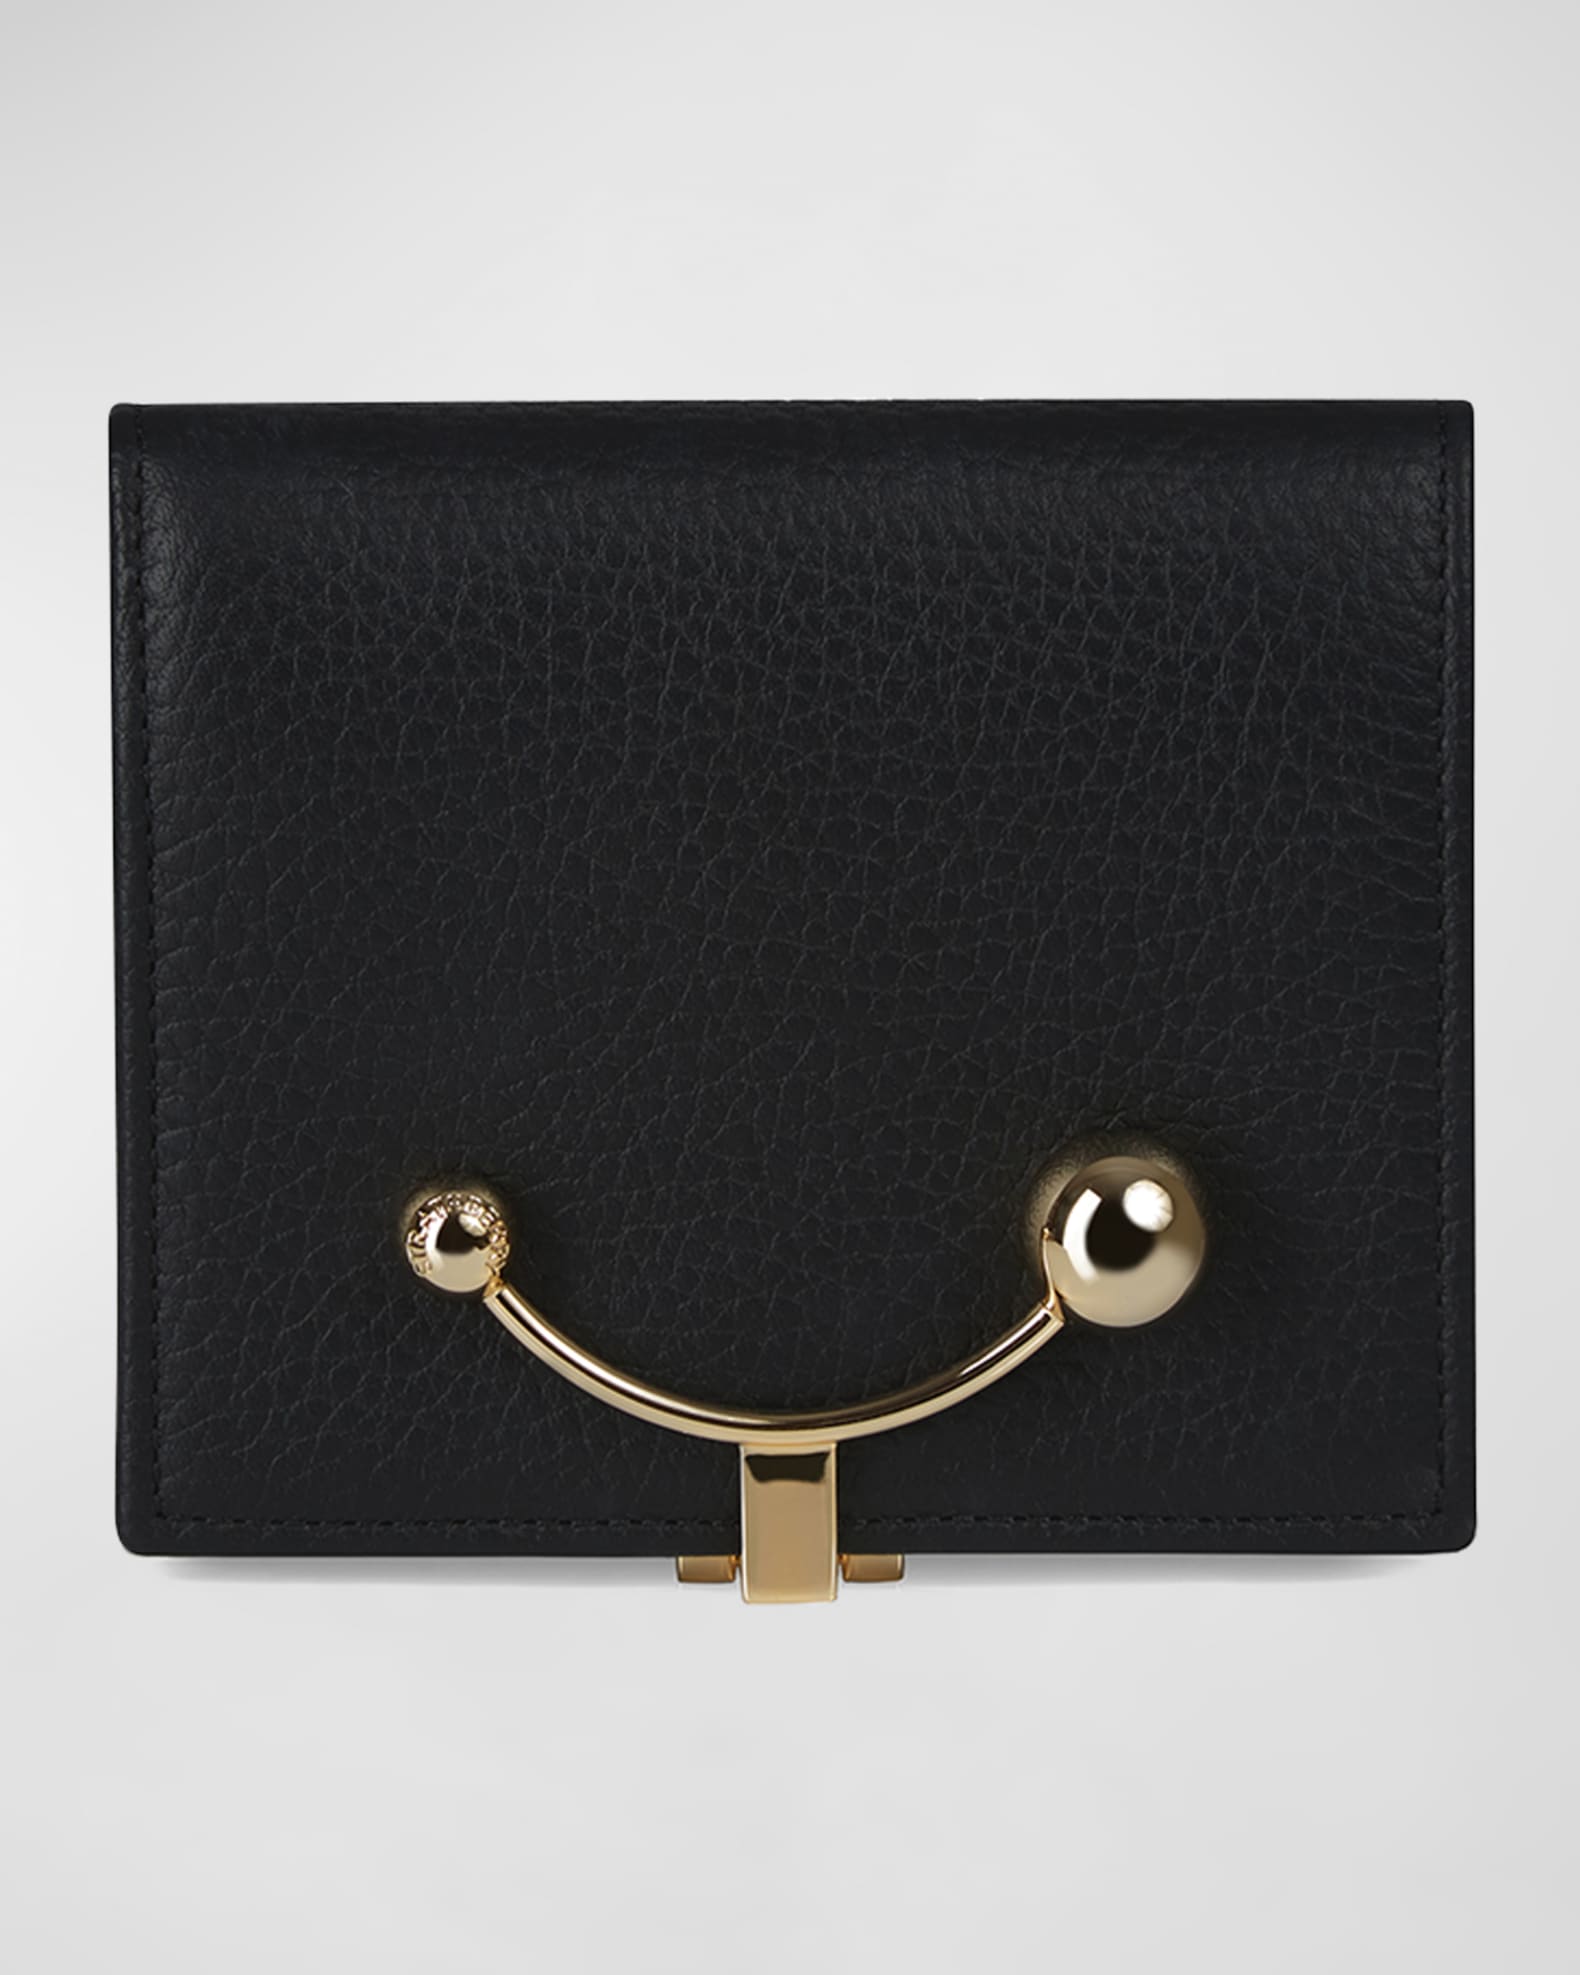 STRATHBERRY Crescent Flap Leather Wallet | Neiman Marcus